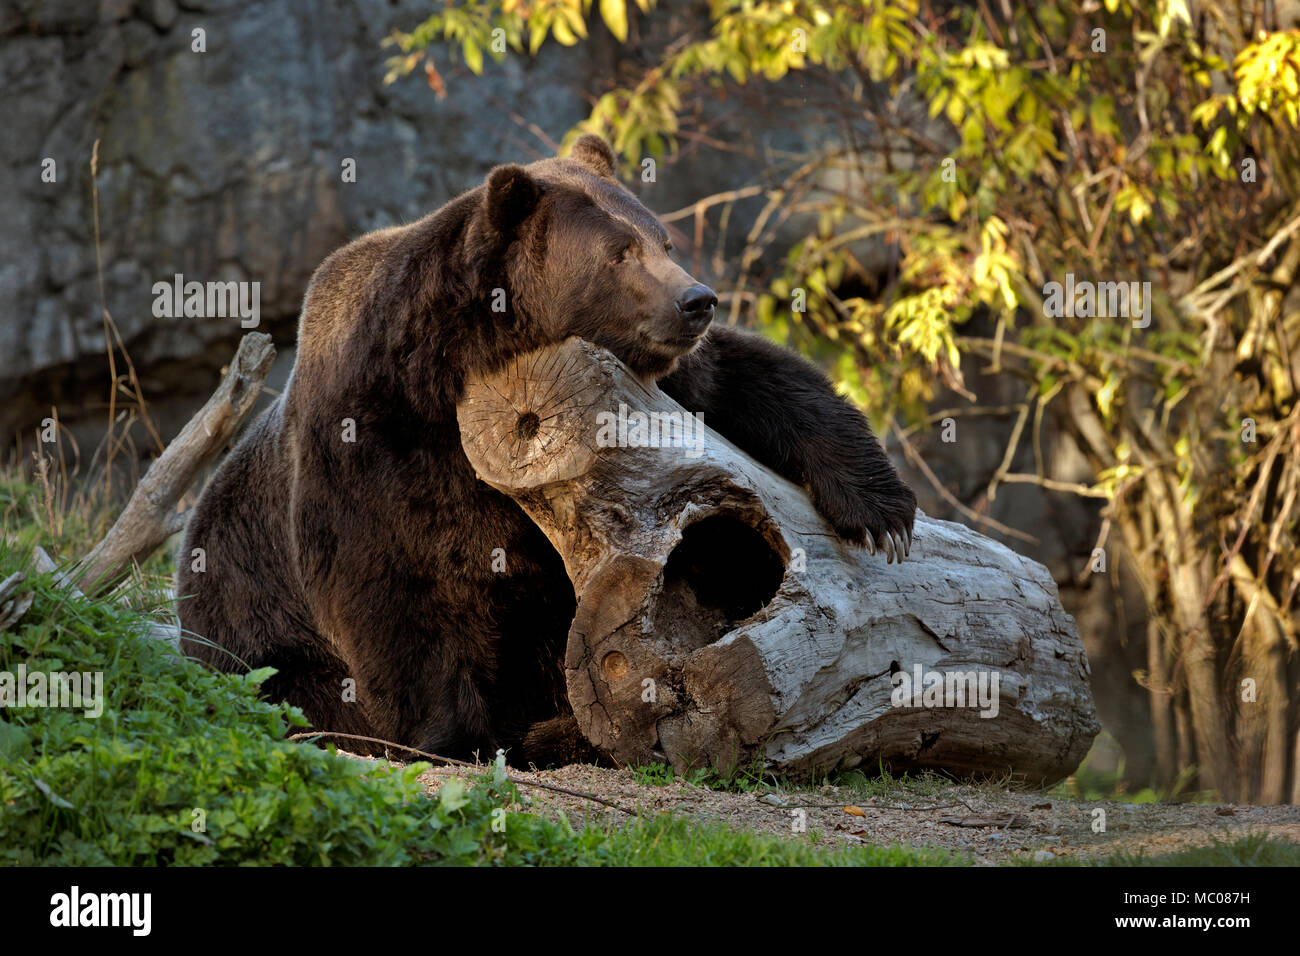 WA15118-00...WASHINGTON - A  very relaxed brown bear viewed along the North Trail Exhibit at Seattle's Woodland Park Zoo. Stock Photo